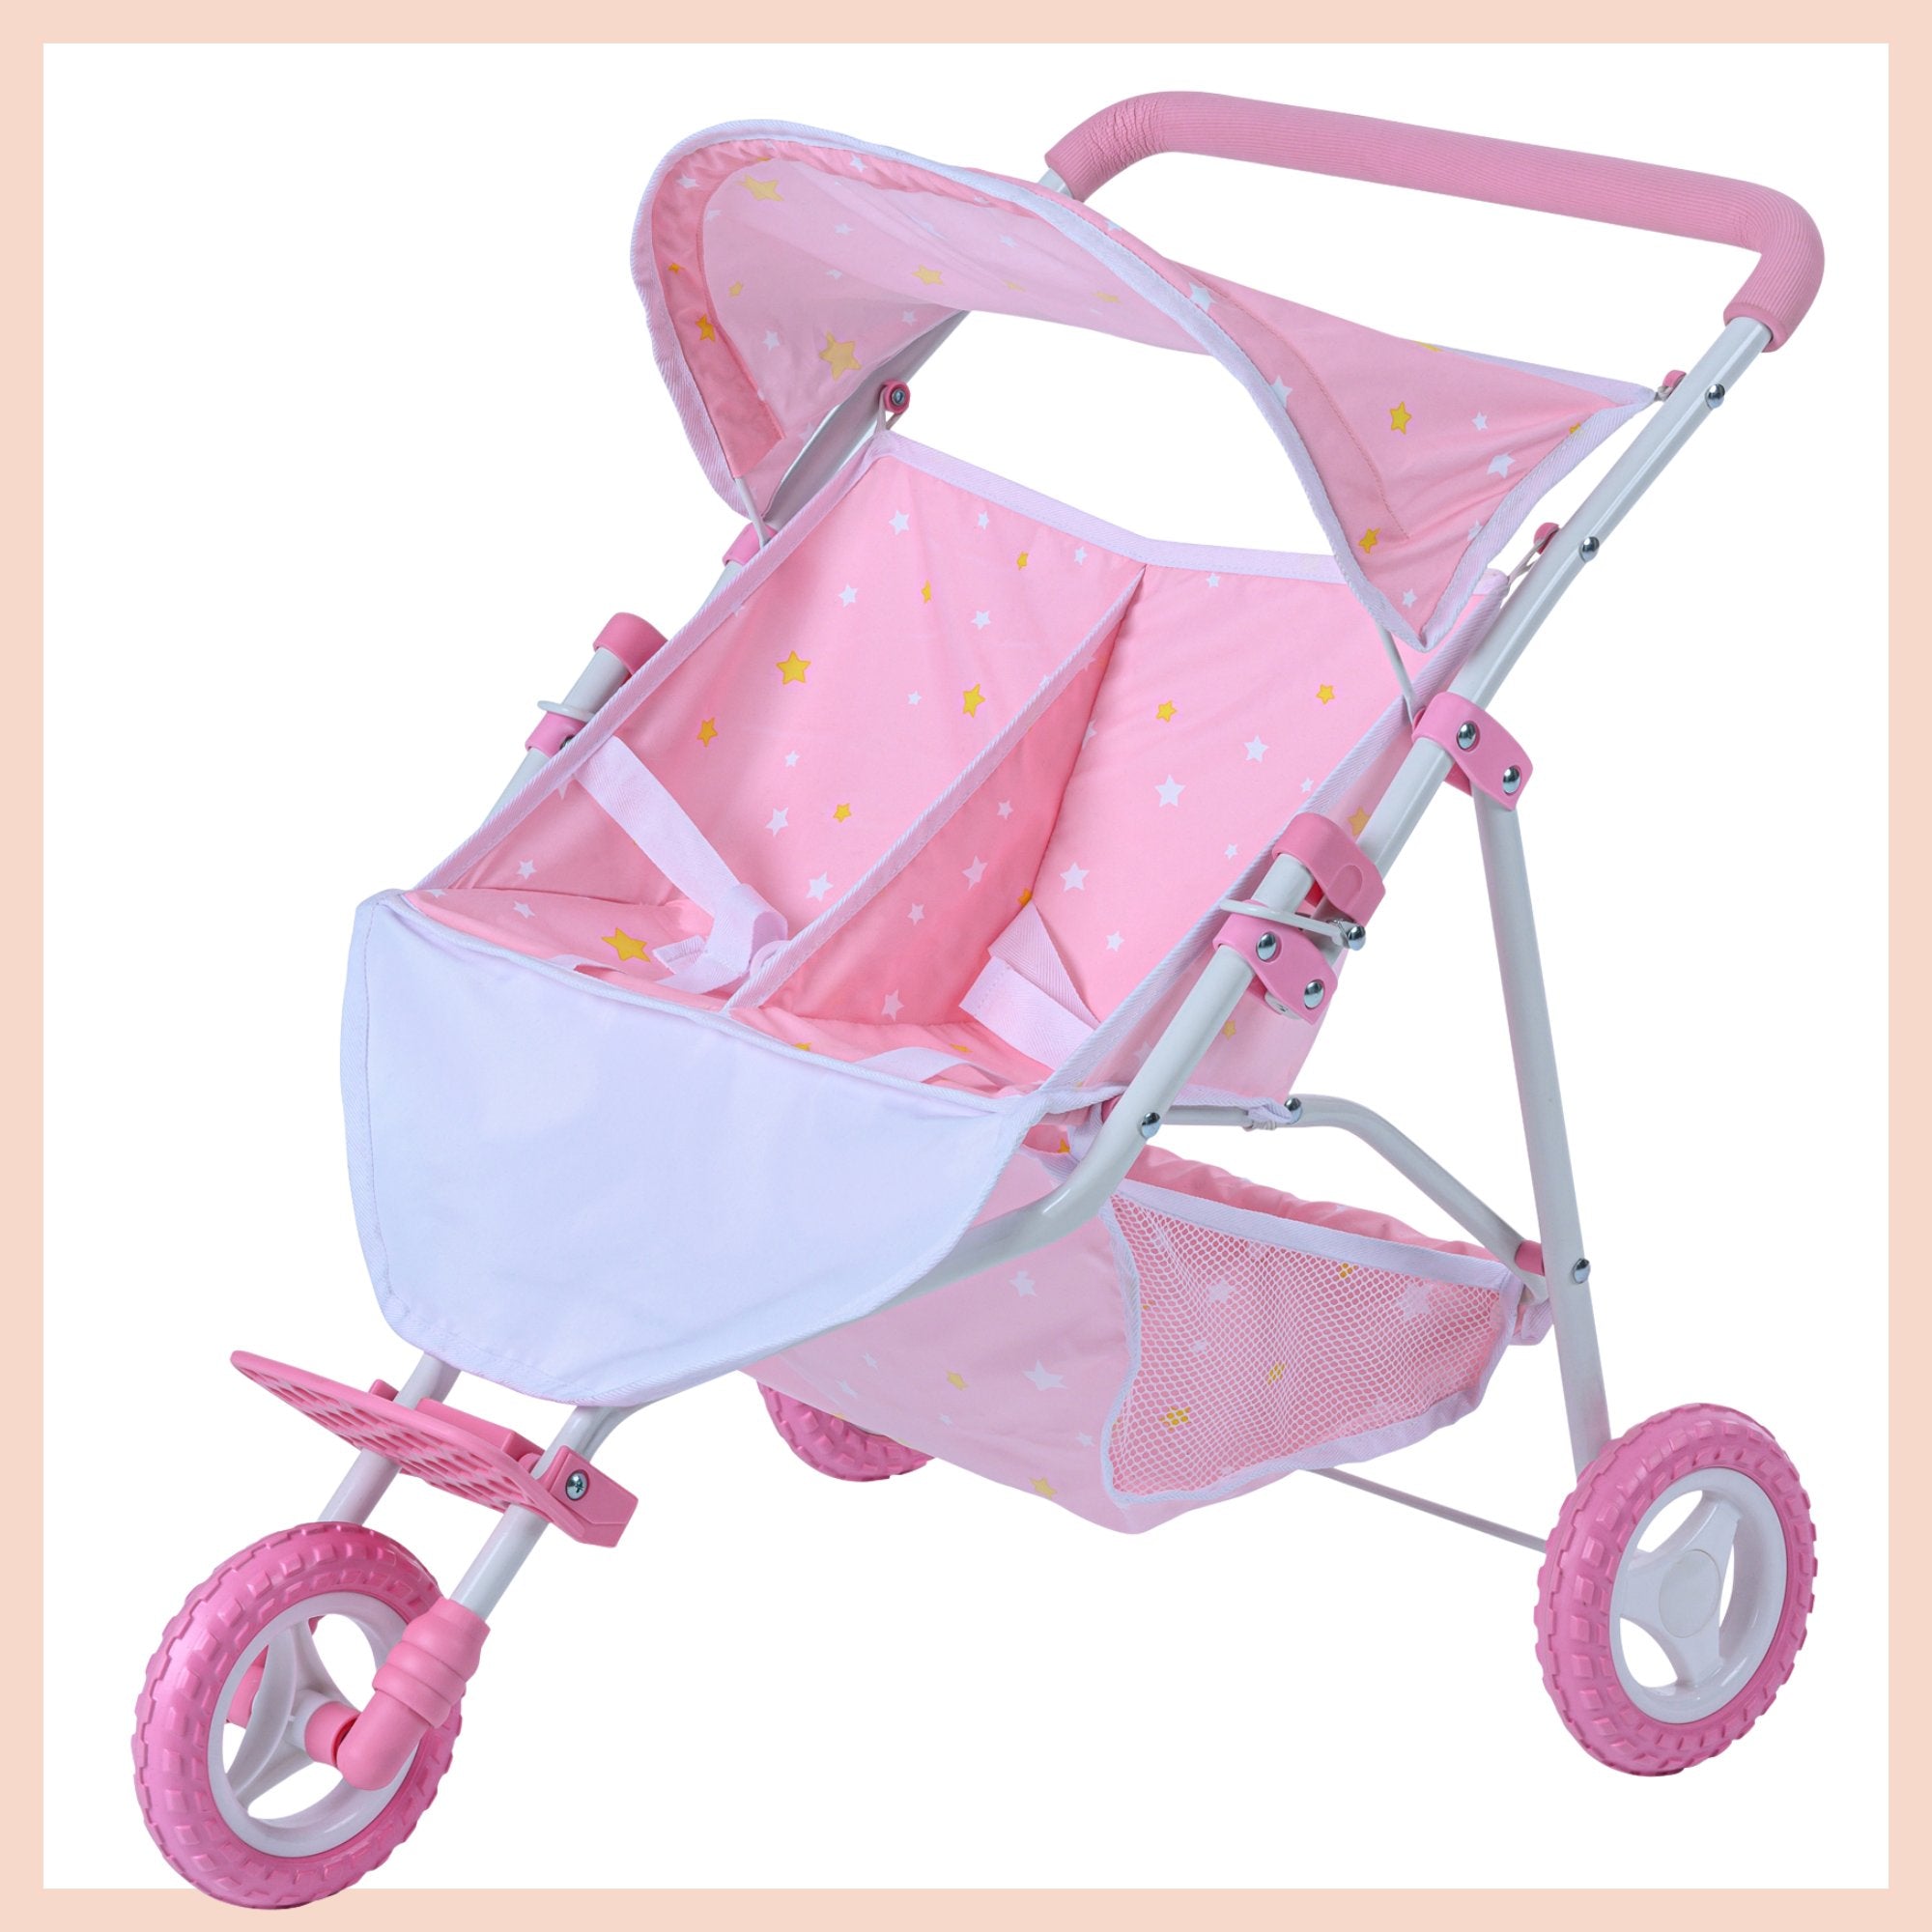 Image shows an iridescent doll-sized stroller for kids.